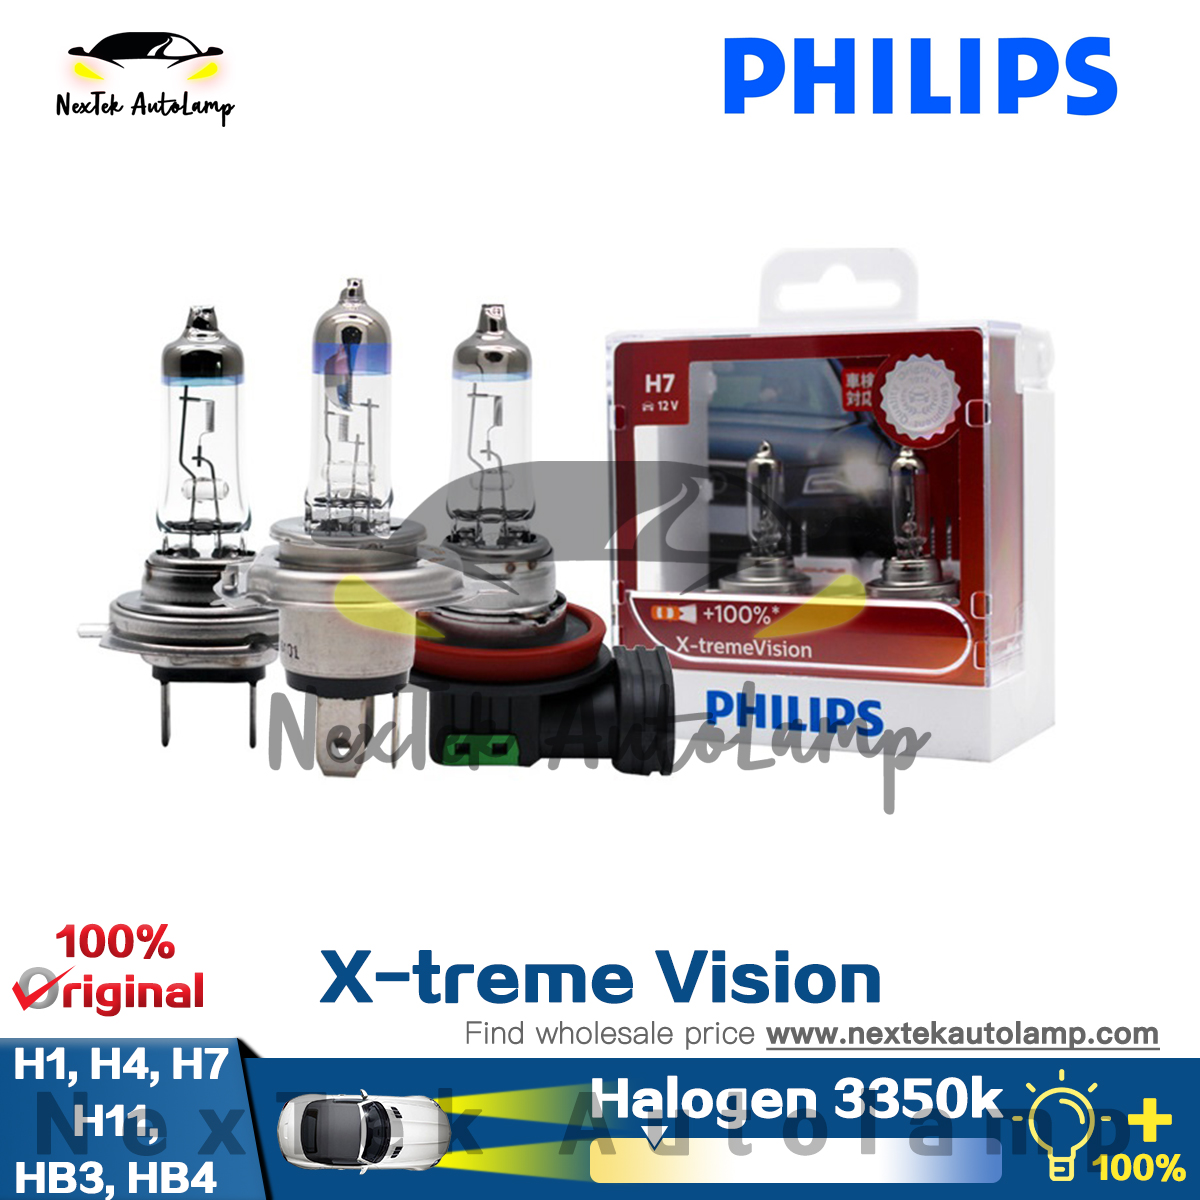 Philips X-treme Vision H1 H4 H7 H11 9003 9005 9006 HB3 HB4 Car Headlight  Bright Halogen Bulbs ECE Approve 100% More Vision 3350K Yellow Light, Pair